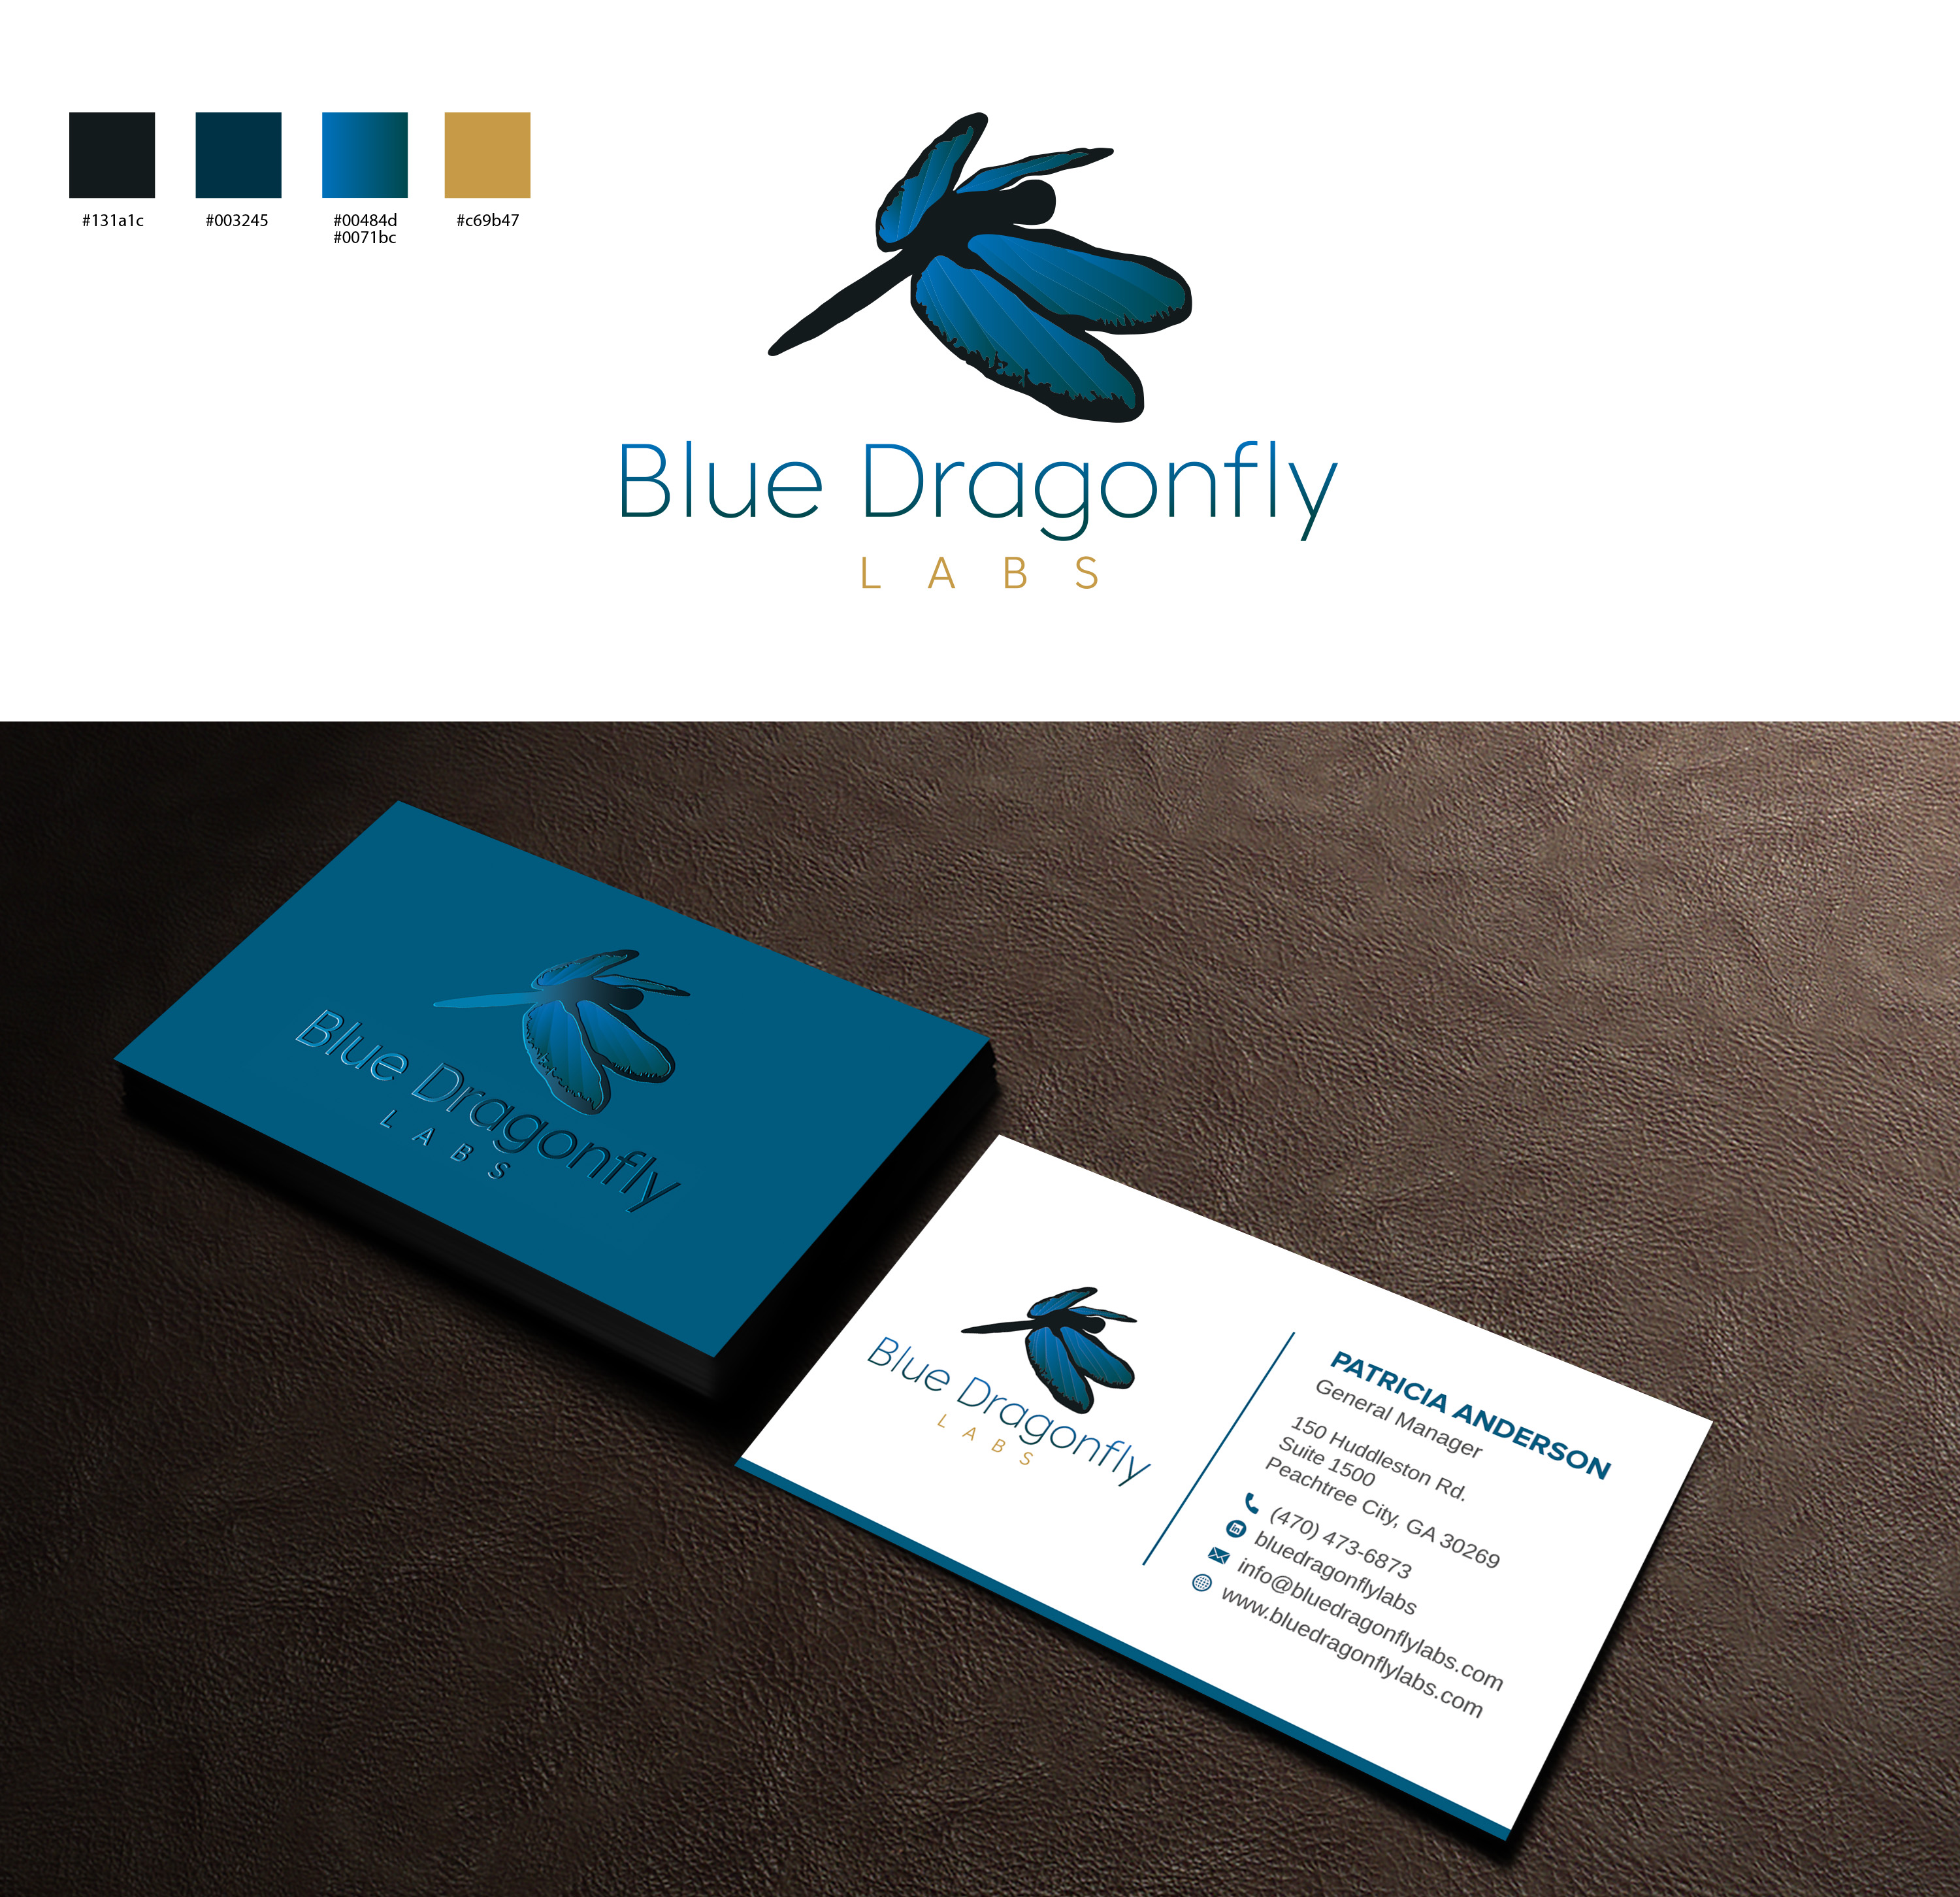 Blue Dragonfly Labs